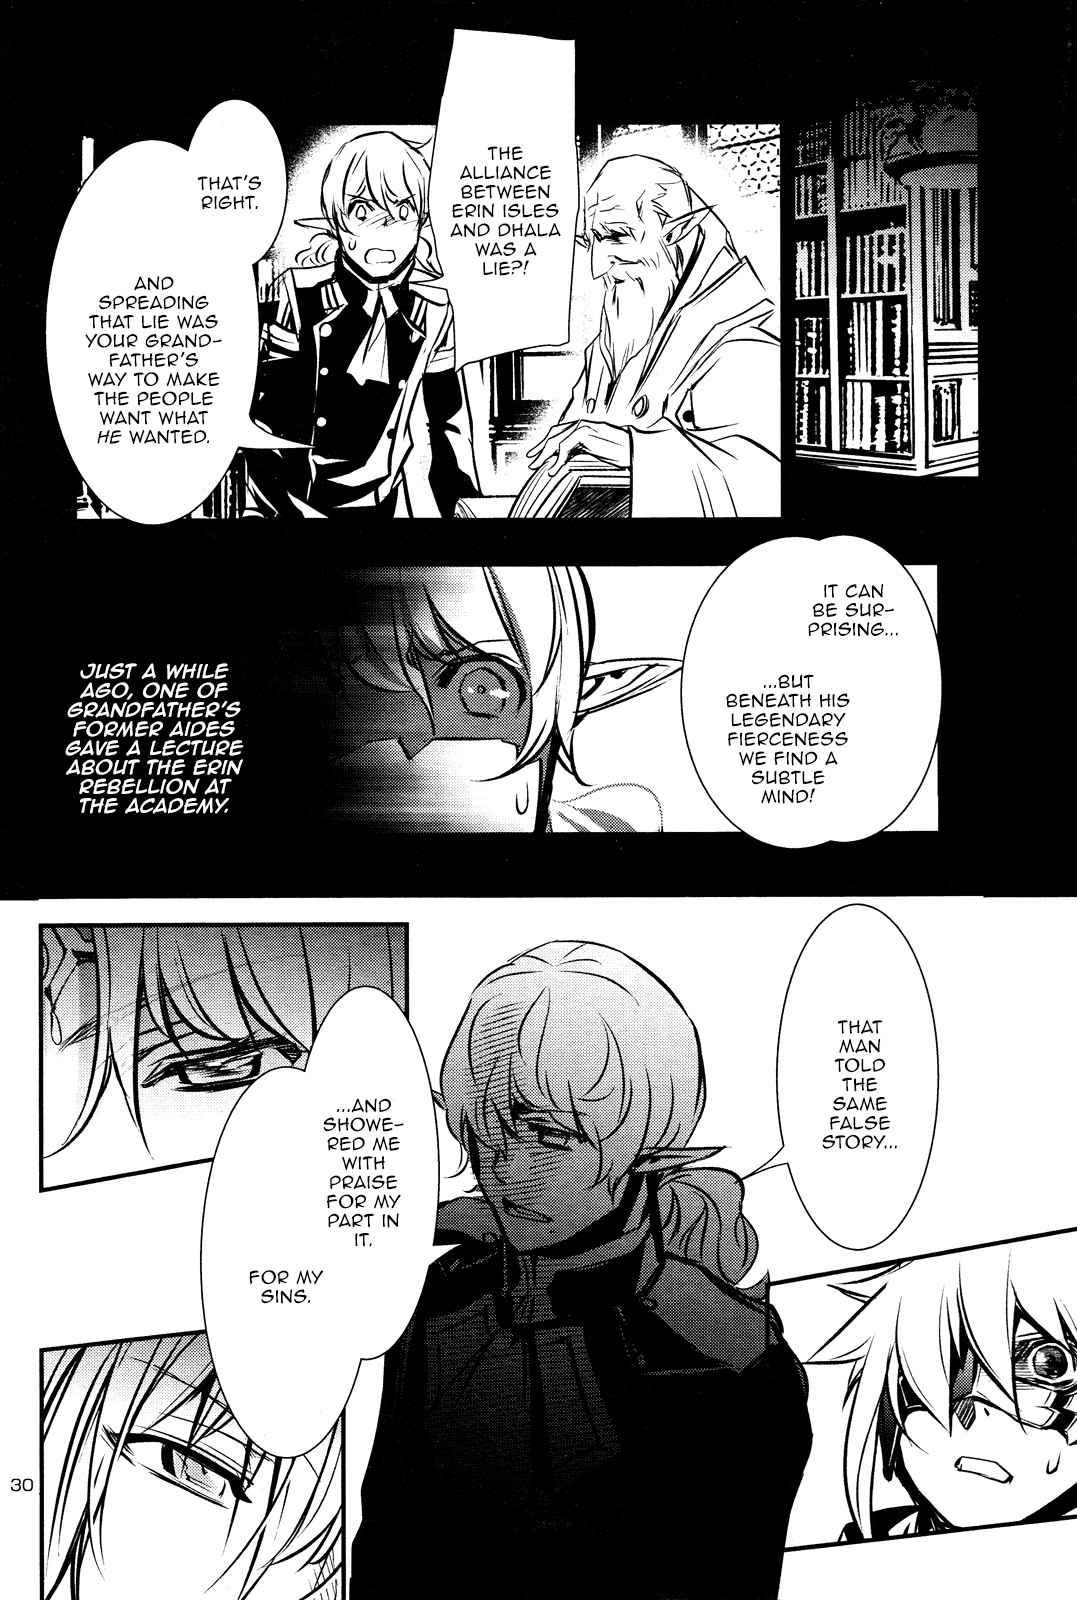 Shinju no Nectar Ch. 38 The Bloodstained Isles